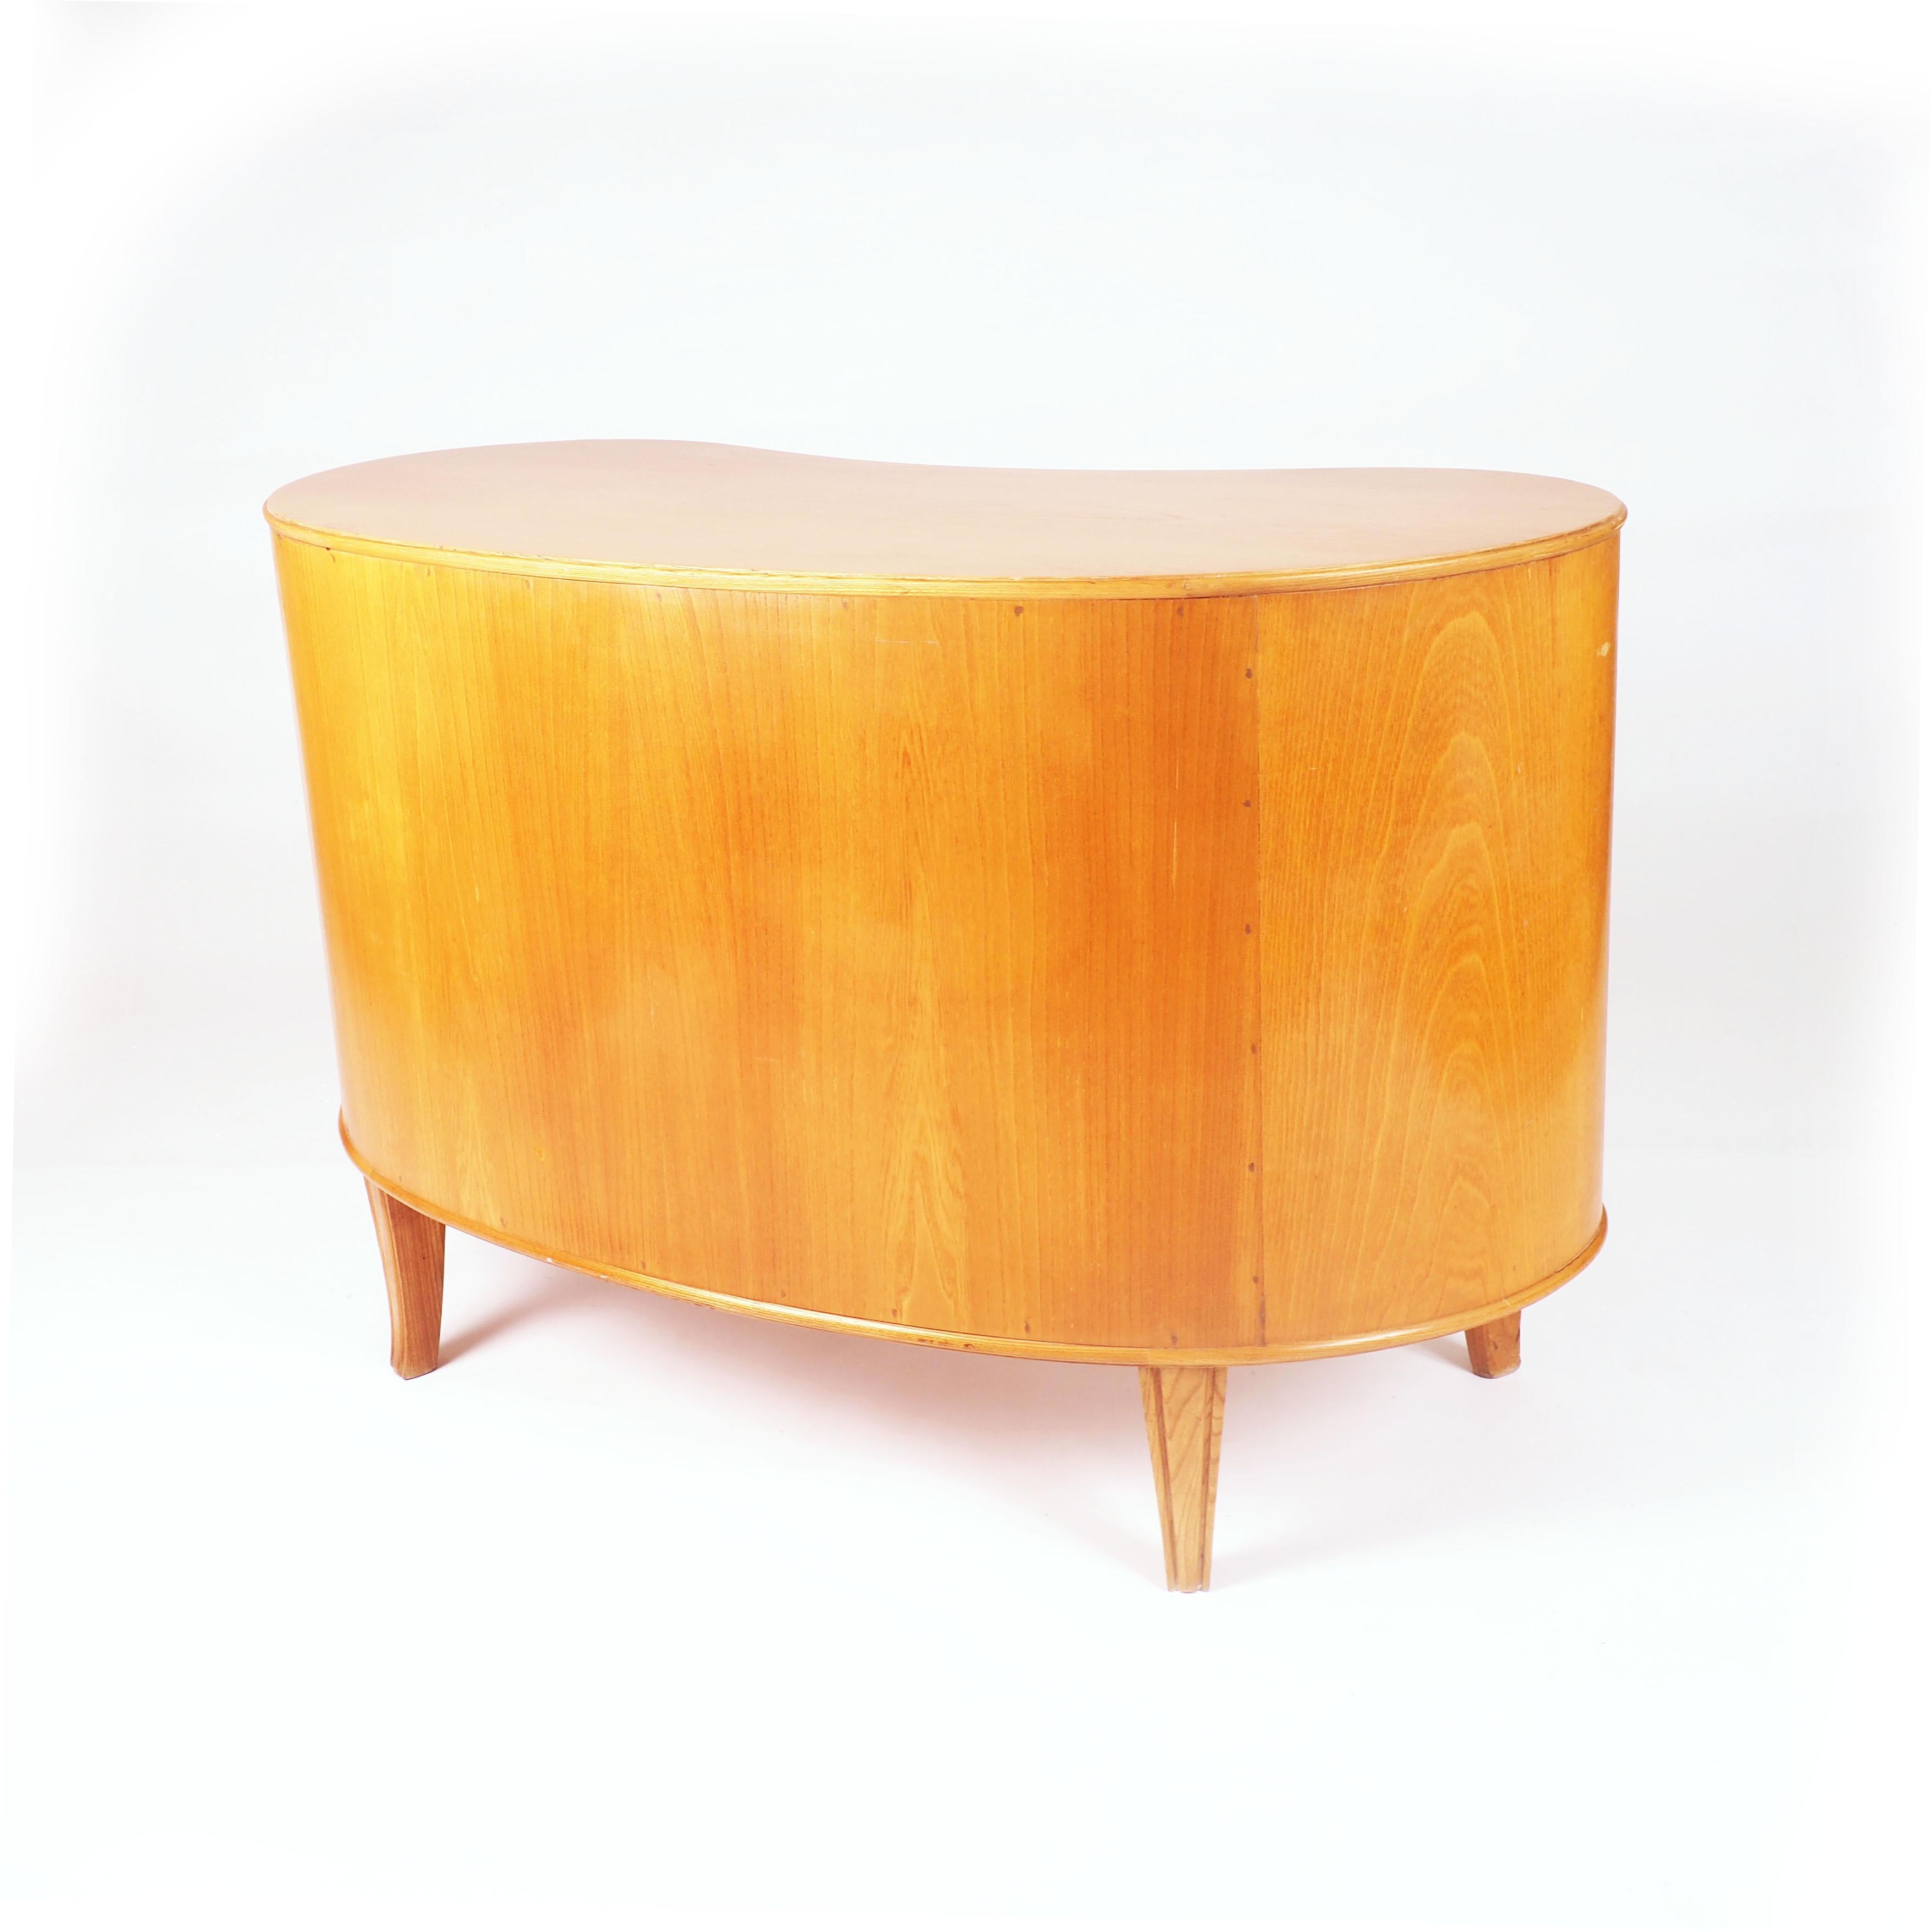 Mid-20th Century Axel Larsson Kidney Shaped Chest of Drawers Made by Bodafors, Sweden For Sale